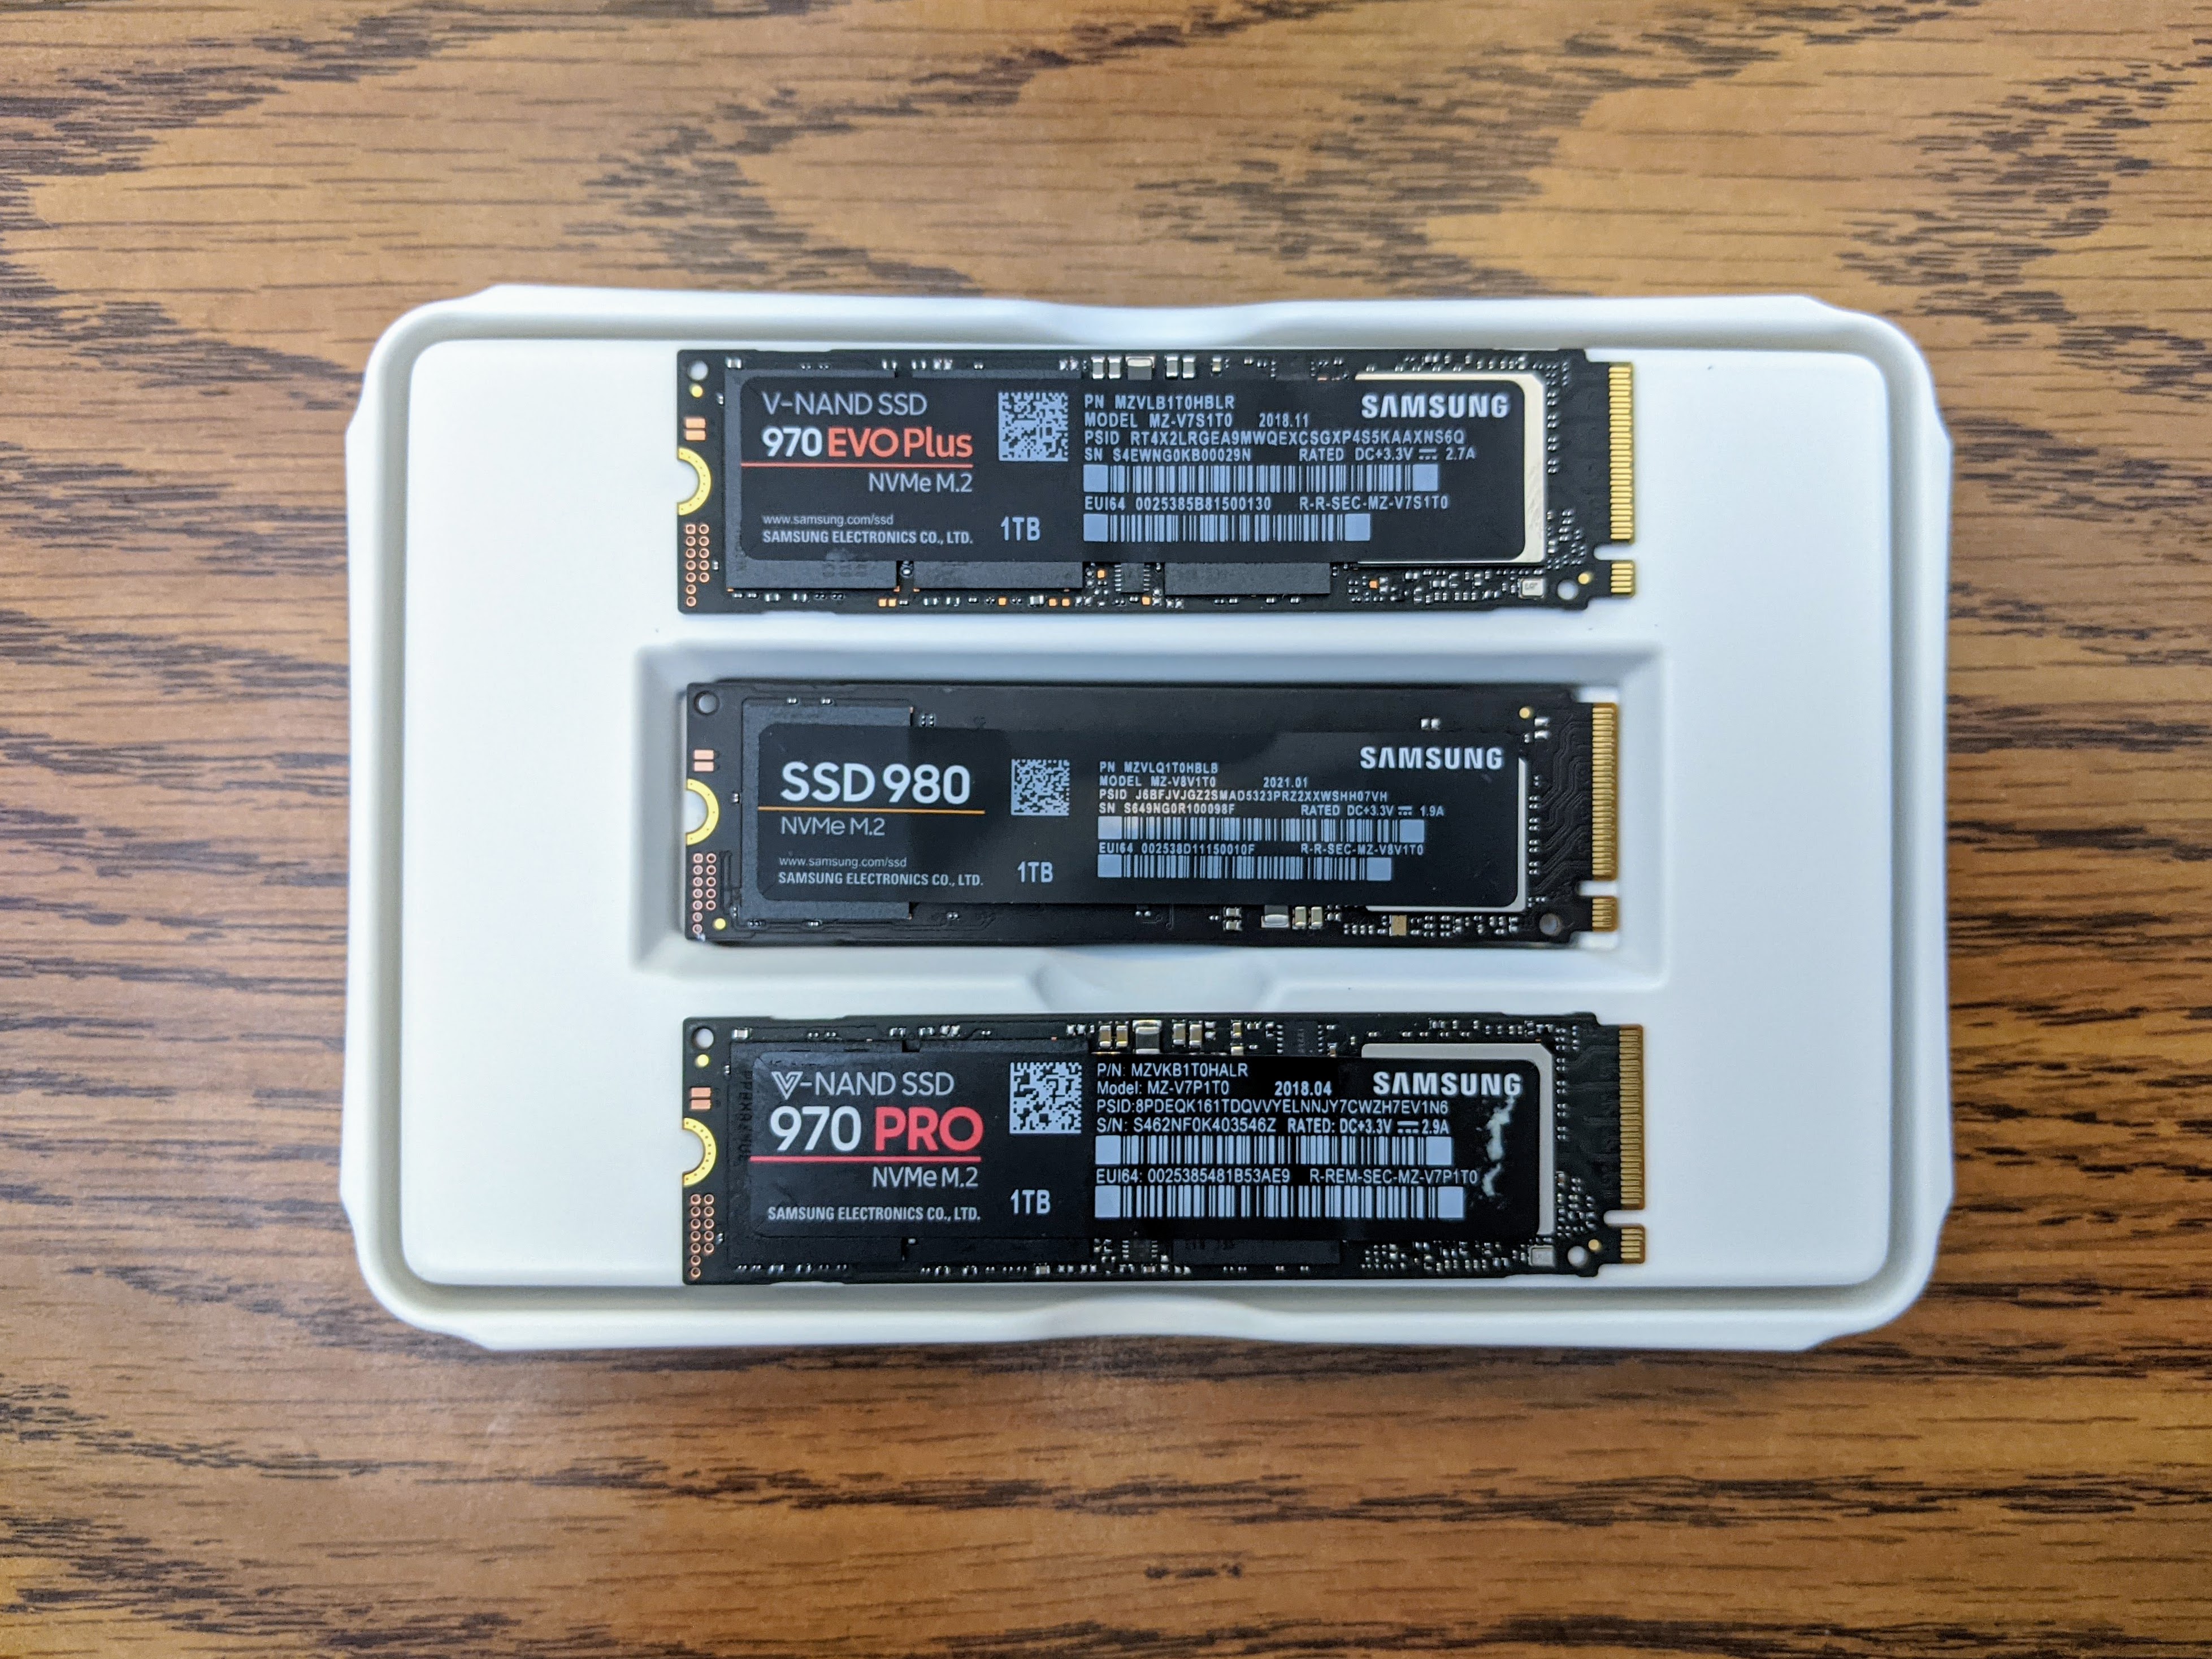 tavle tapperhed besked New Samsung 980 SSD improves on 970 EVO, EVO Plus performance | Ars Technica